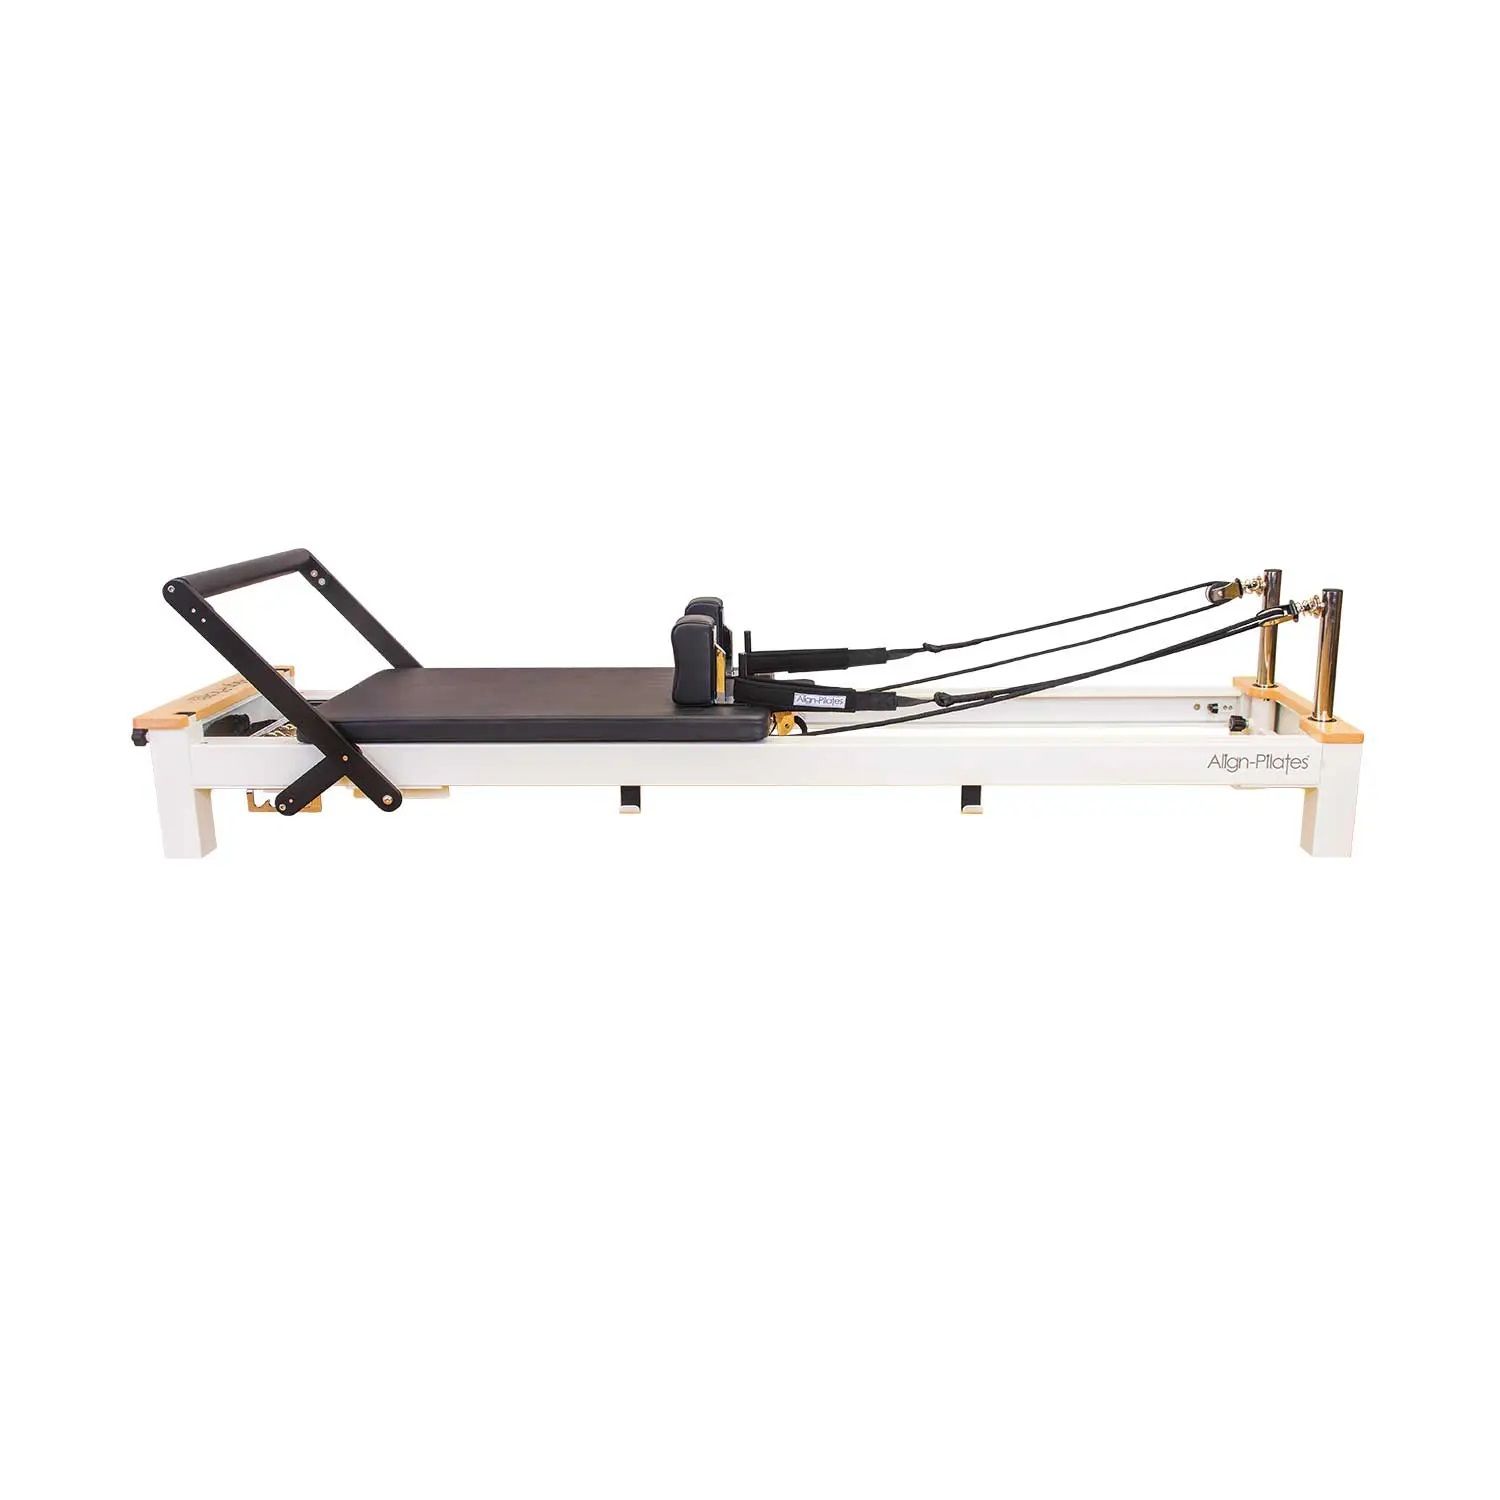 Professional align pilates reformer For Workouts 